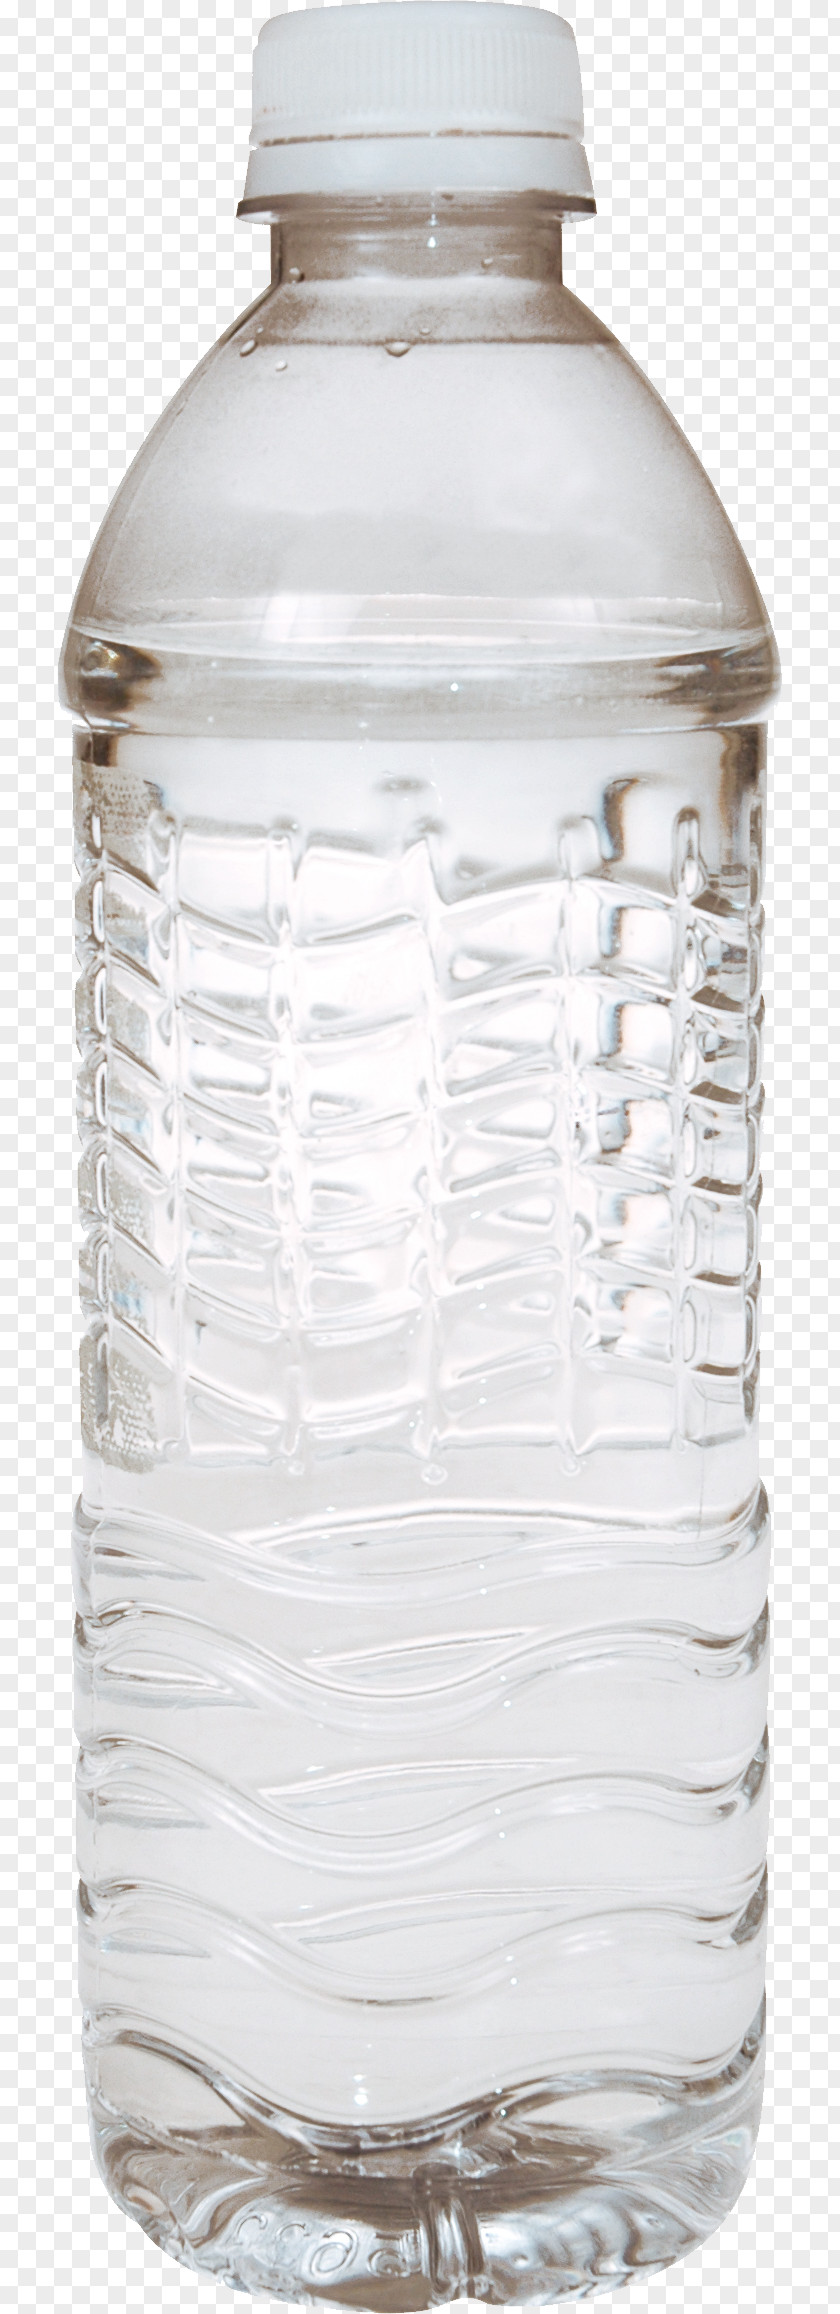 Water Bottle Image Plastic PNG